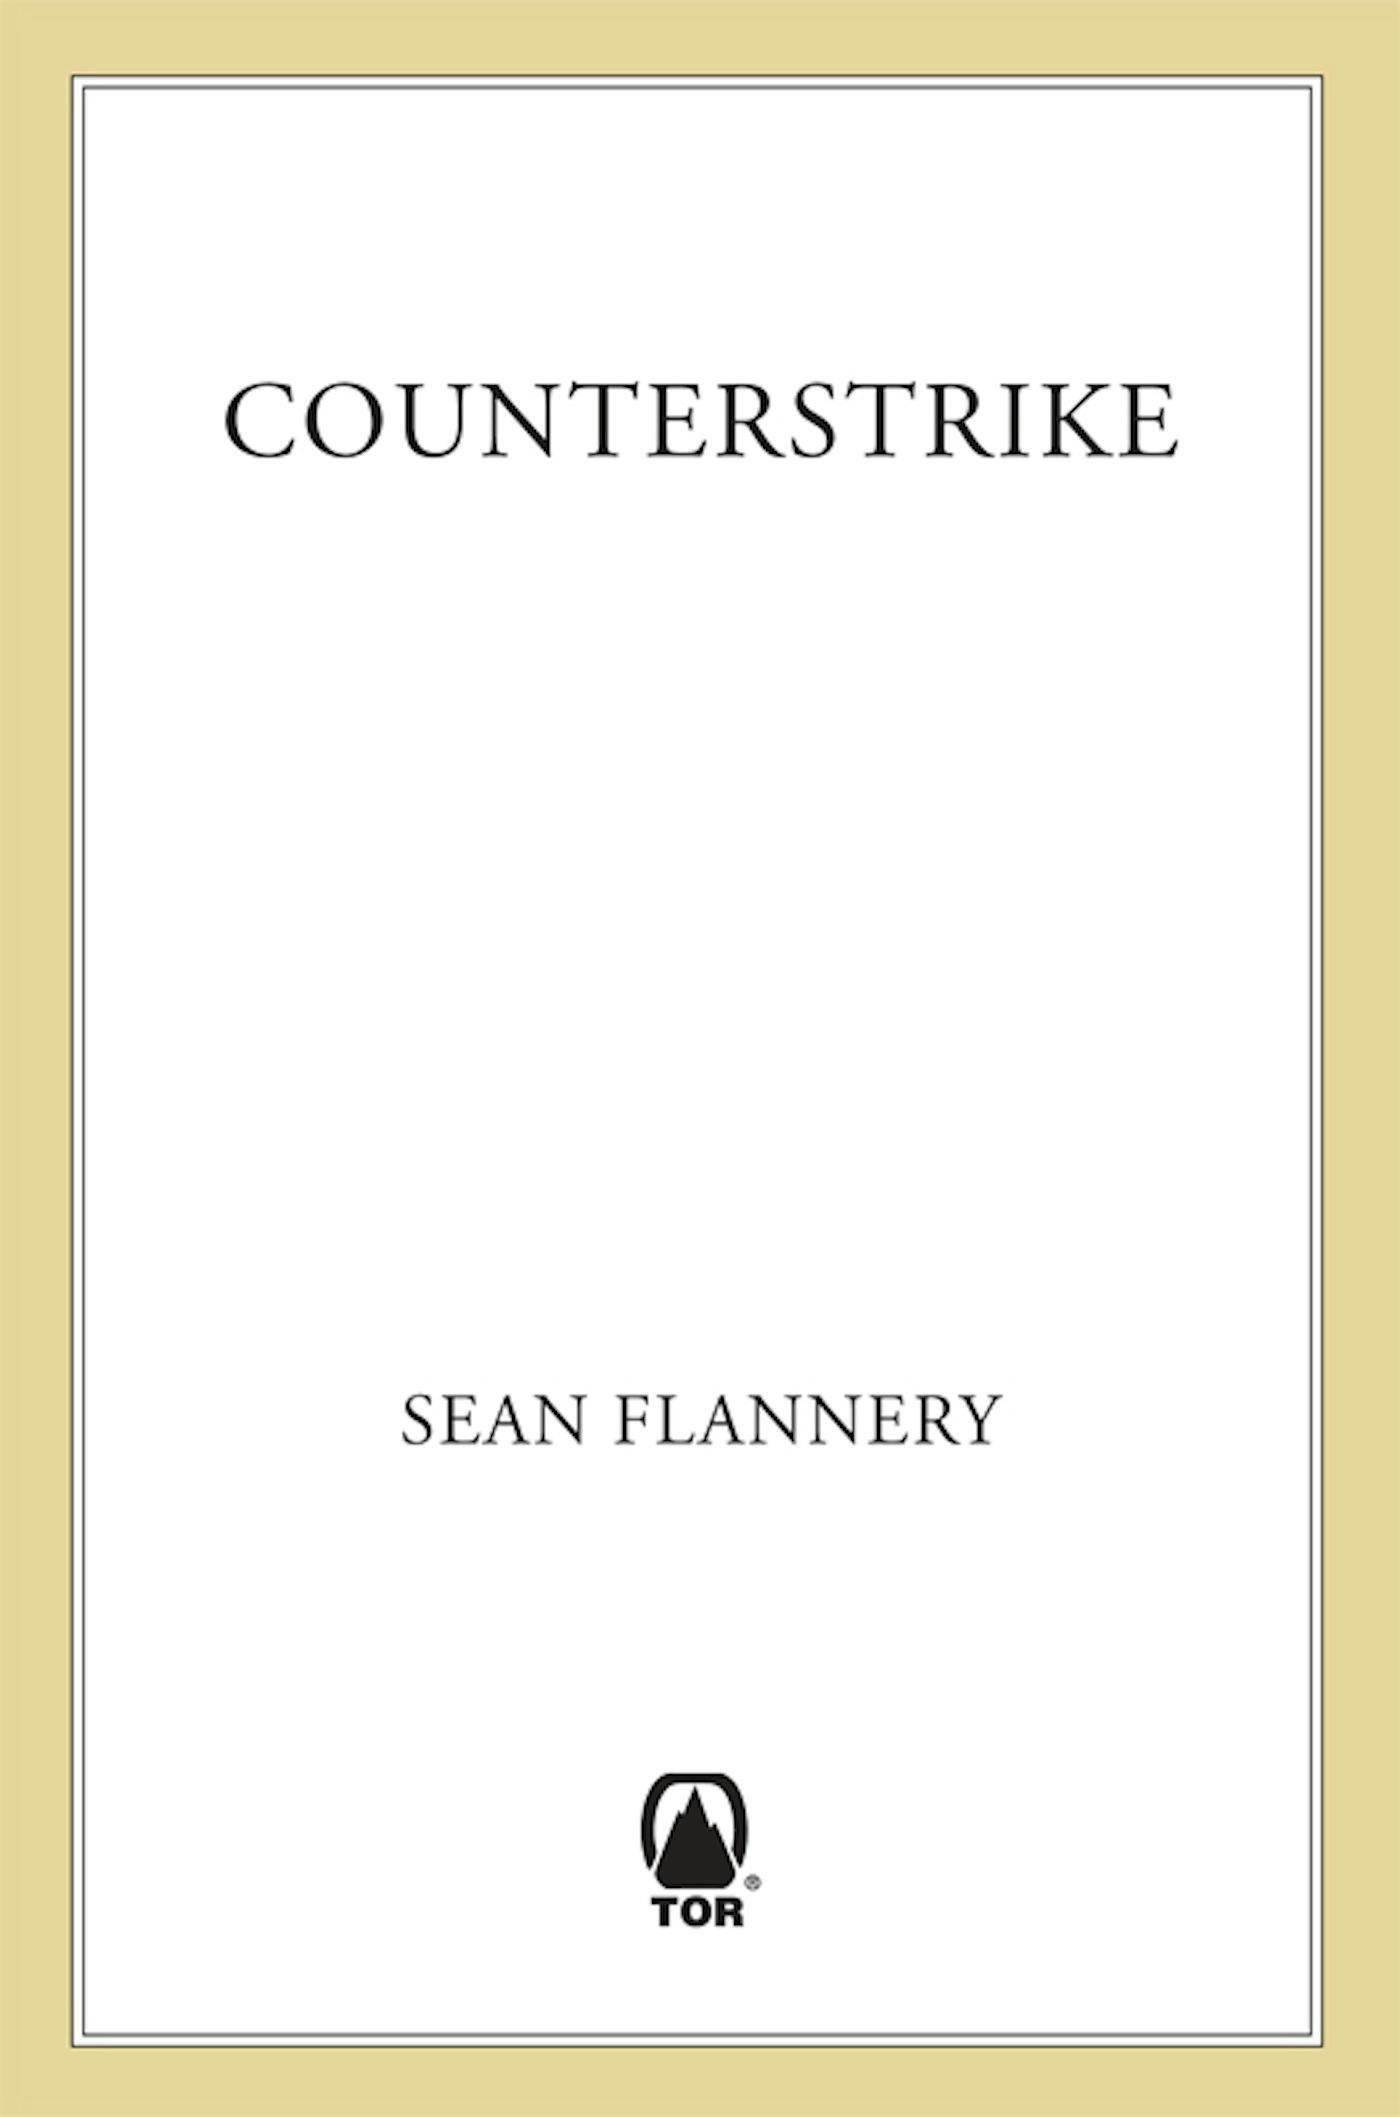 Cover for the book titled as: Counterstrike